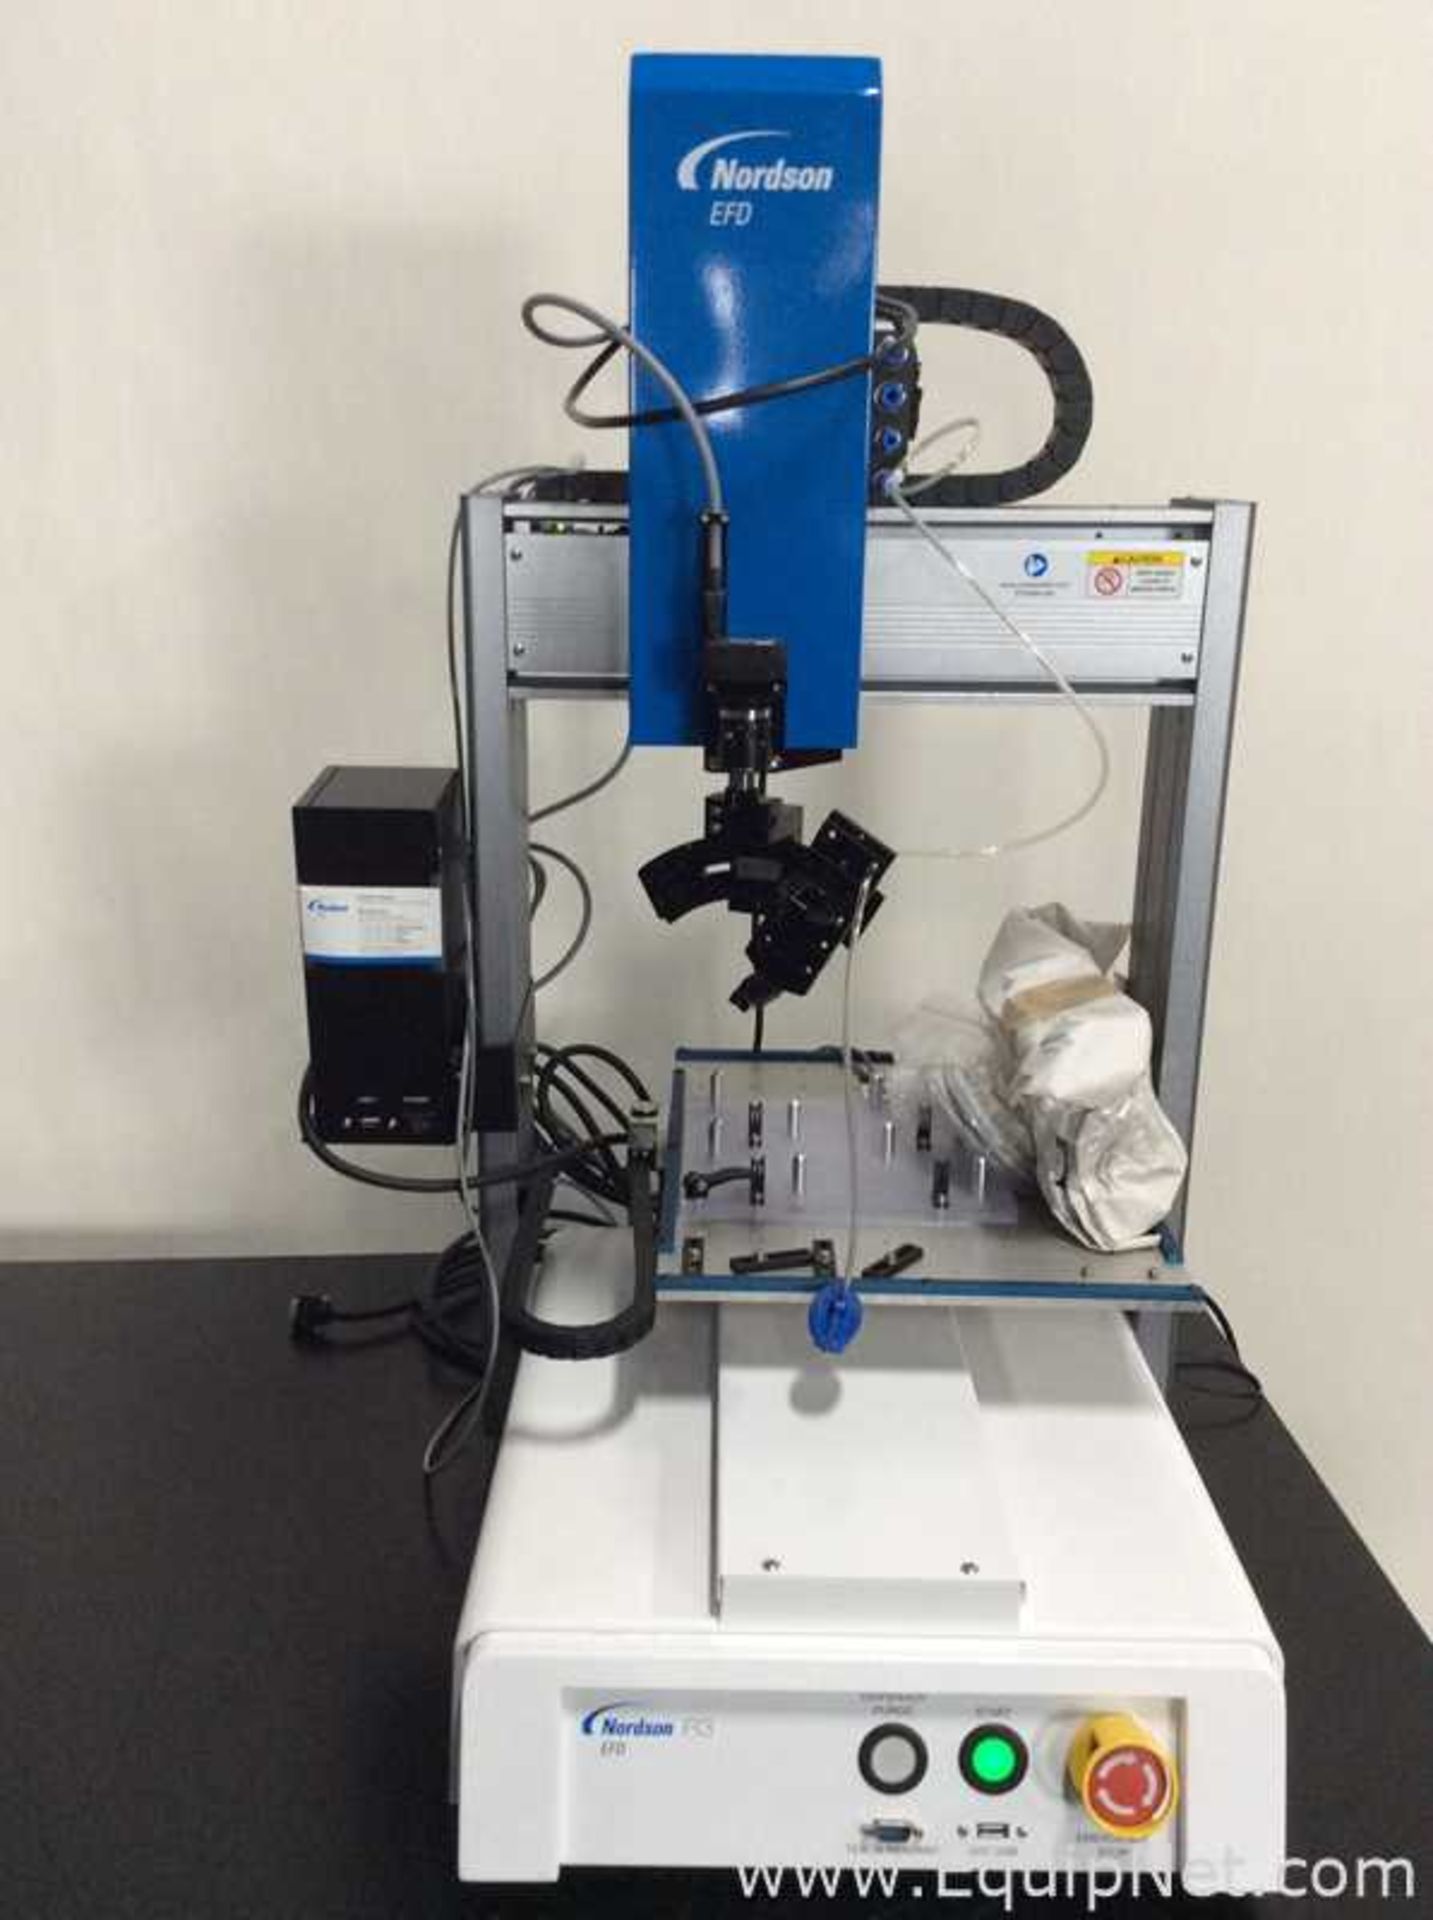 Nordson R3 Automated Fluid Dispensing Robot